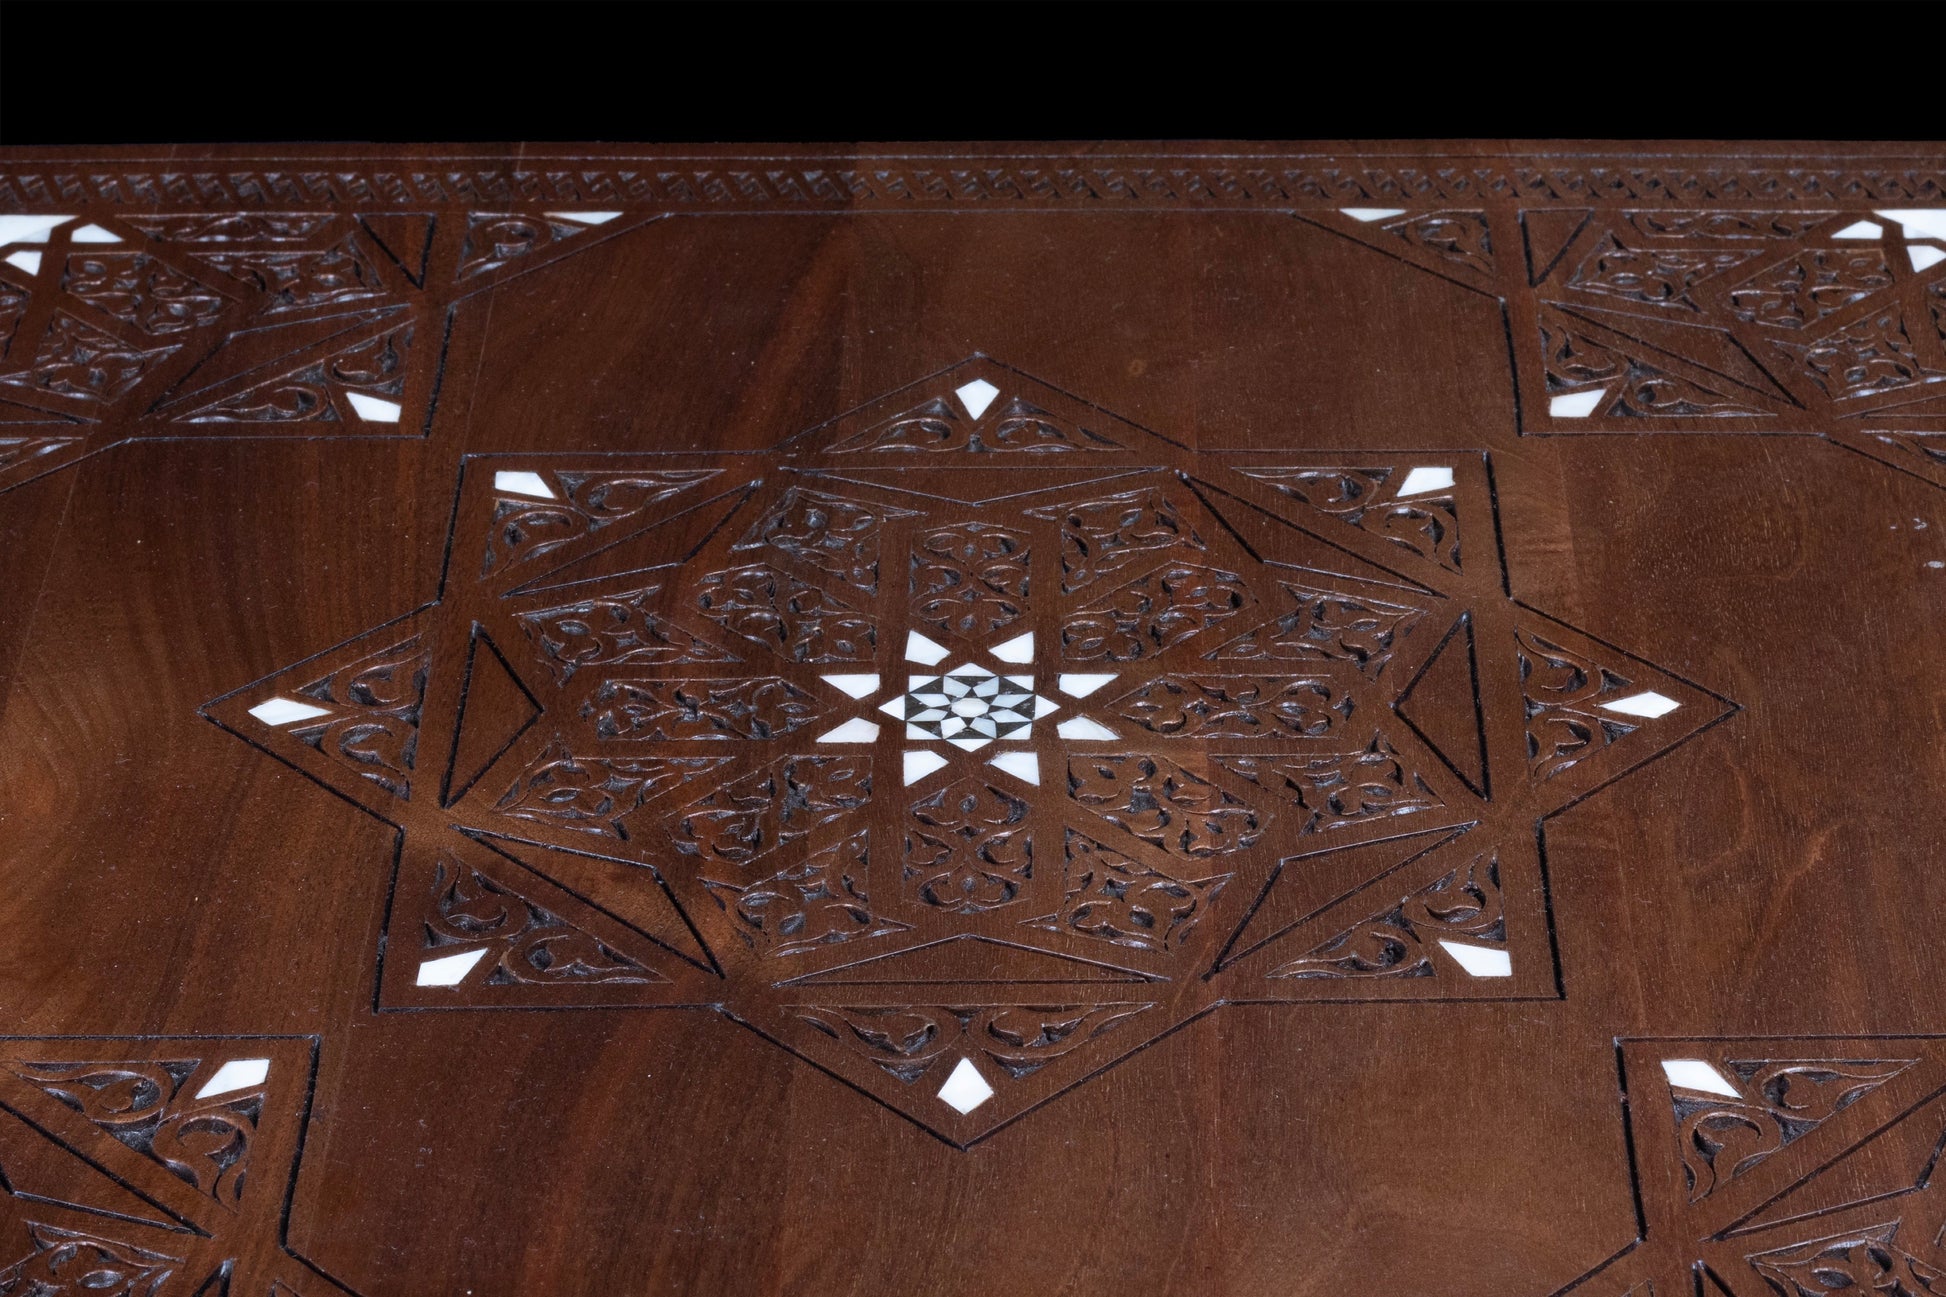 Hand Engraved Wooden Table, inlayed with mother of pearl